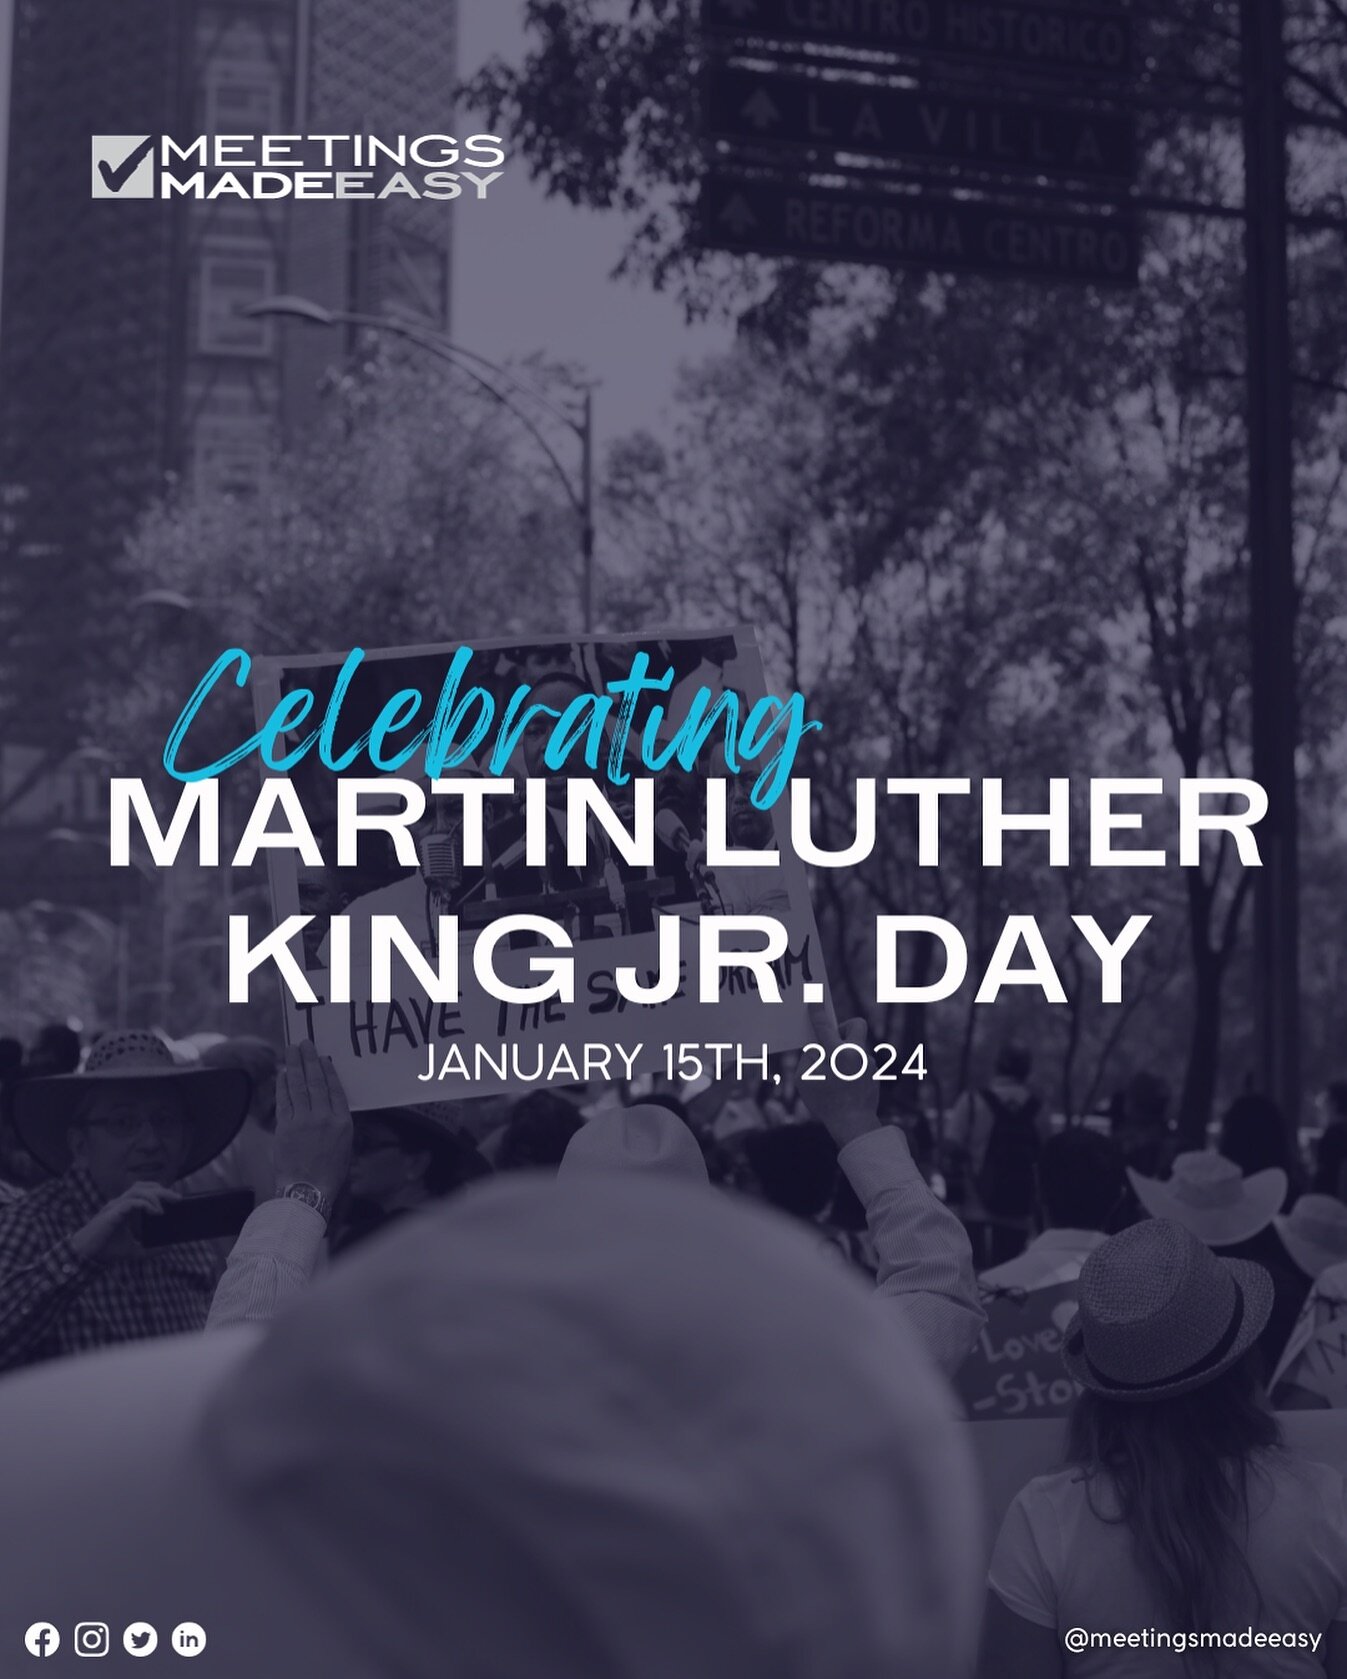 Today we honor the life and legacy of Martin Luther King Jr. 🙏 

#MLK #MartinLutherKingJr